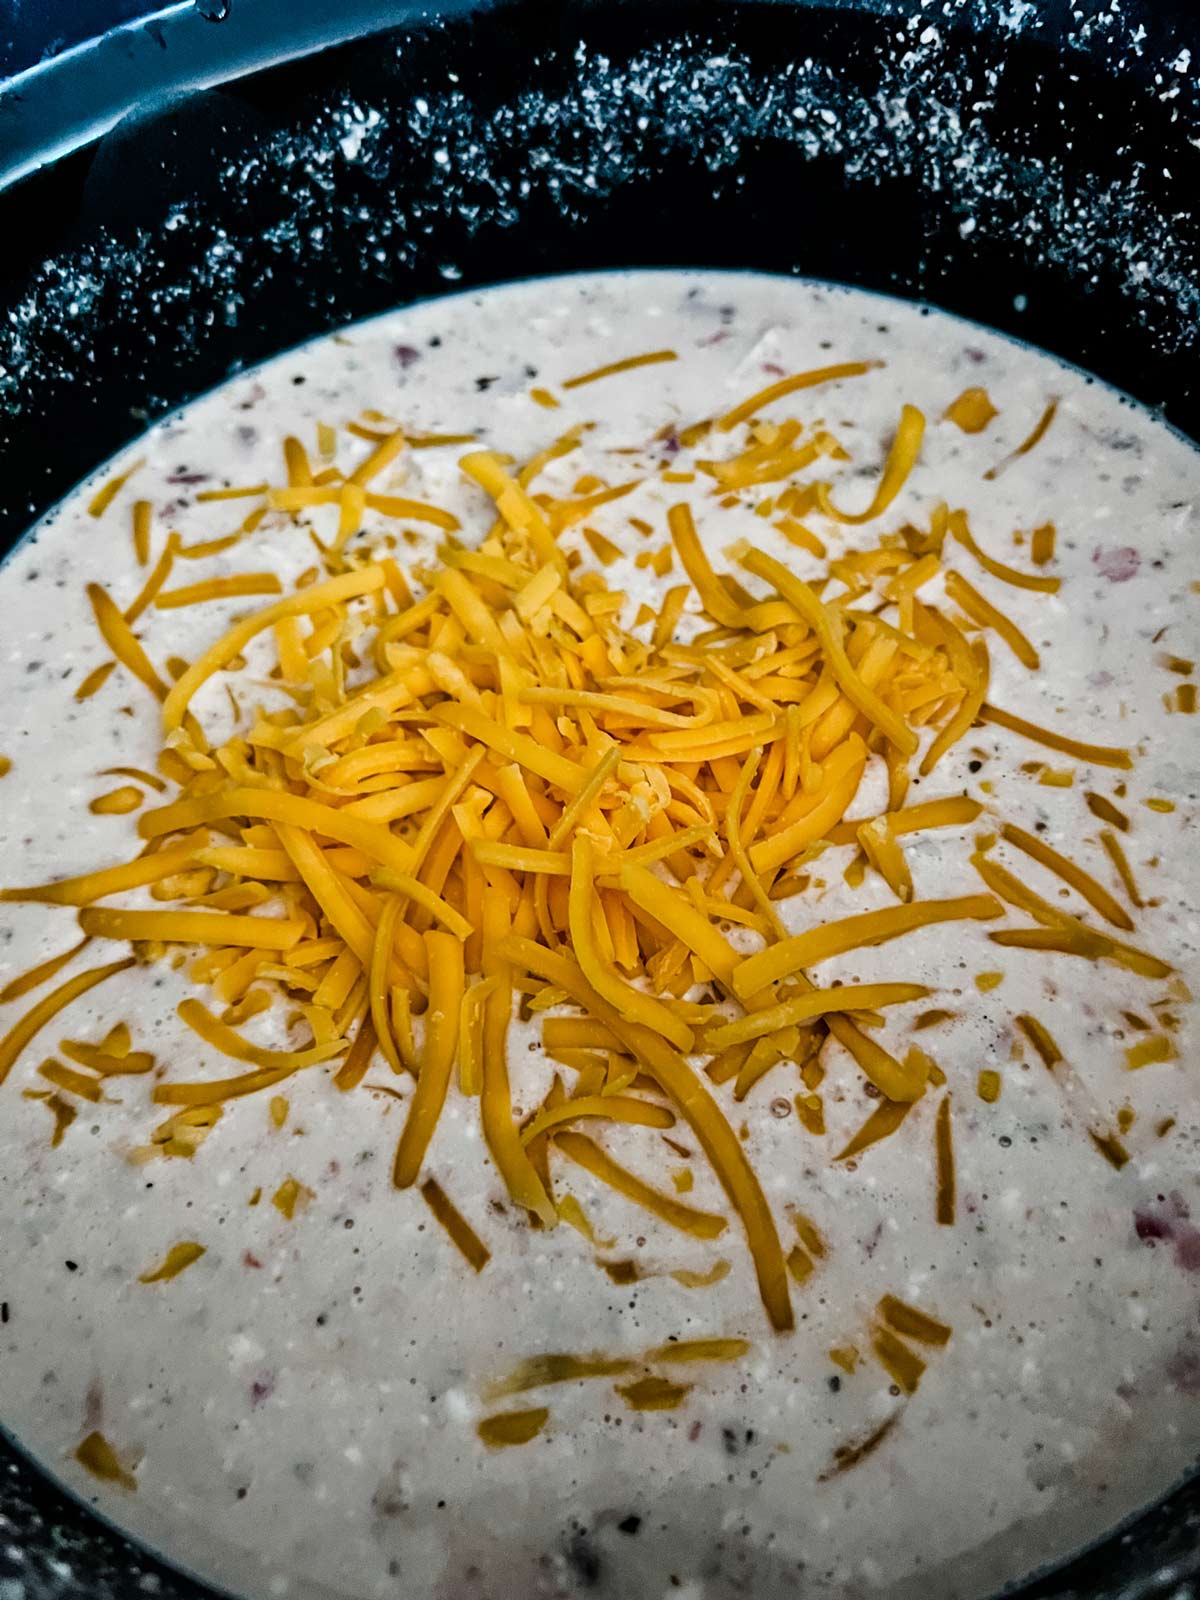 Cheese being whisked into a cream sauce in a slow cooker.